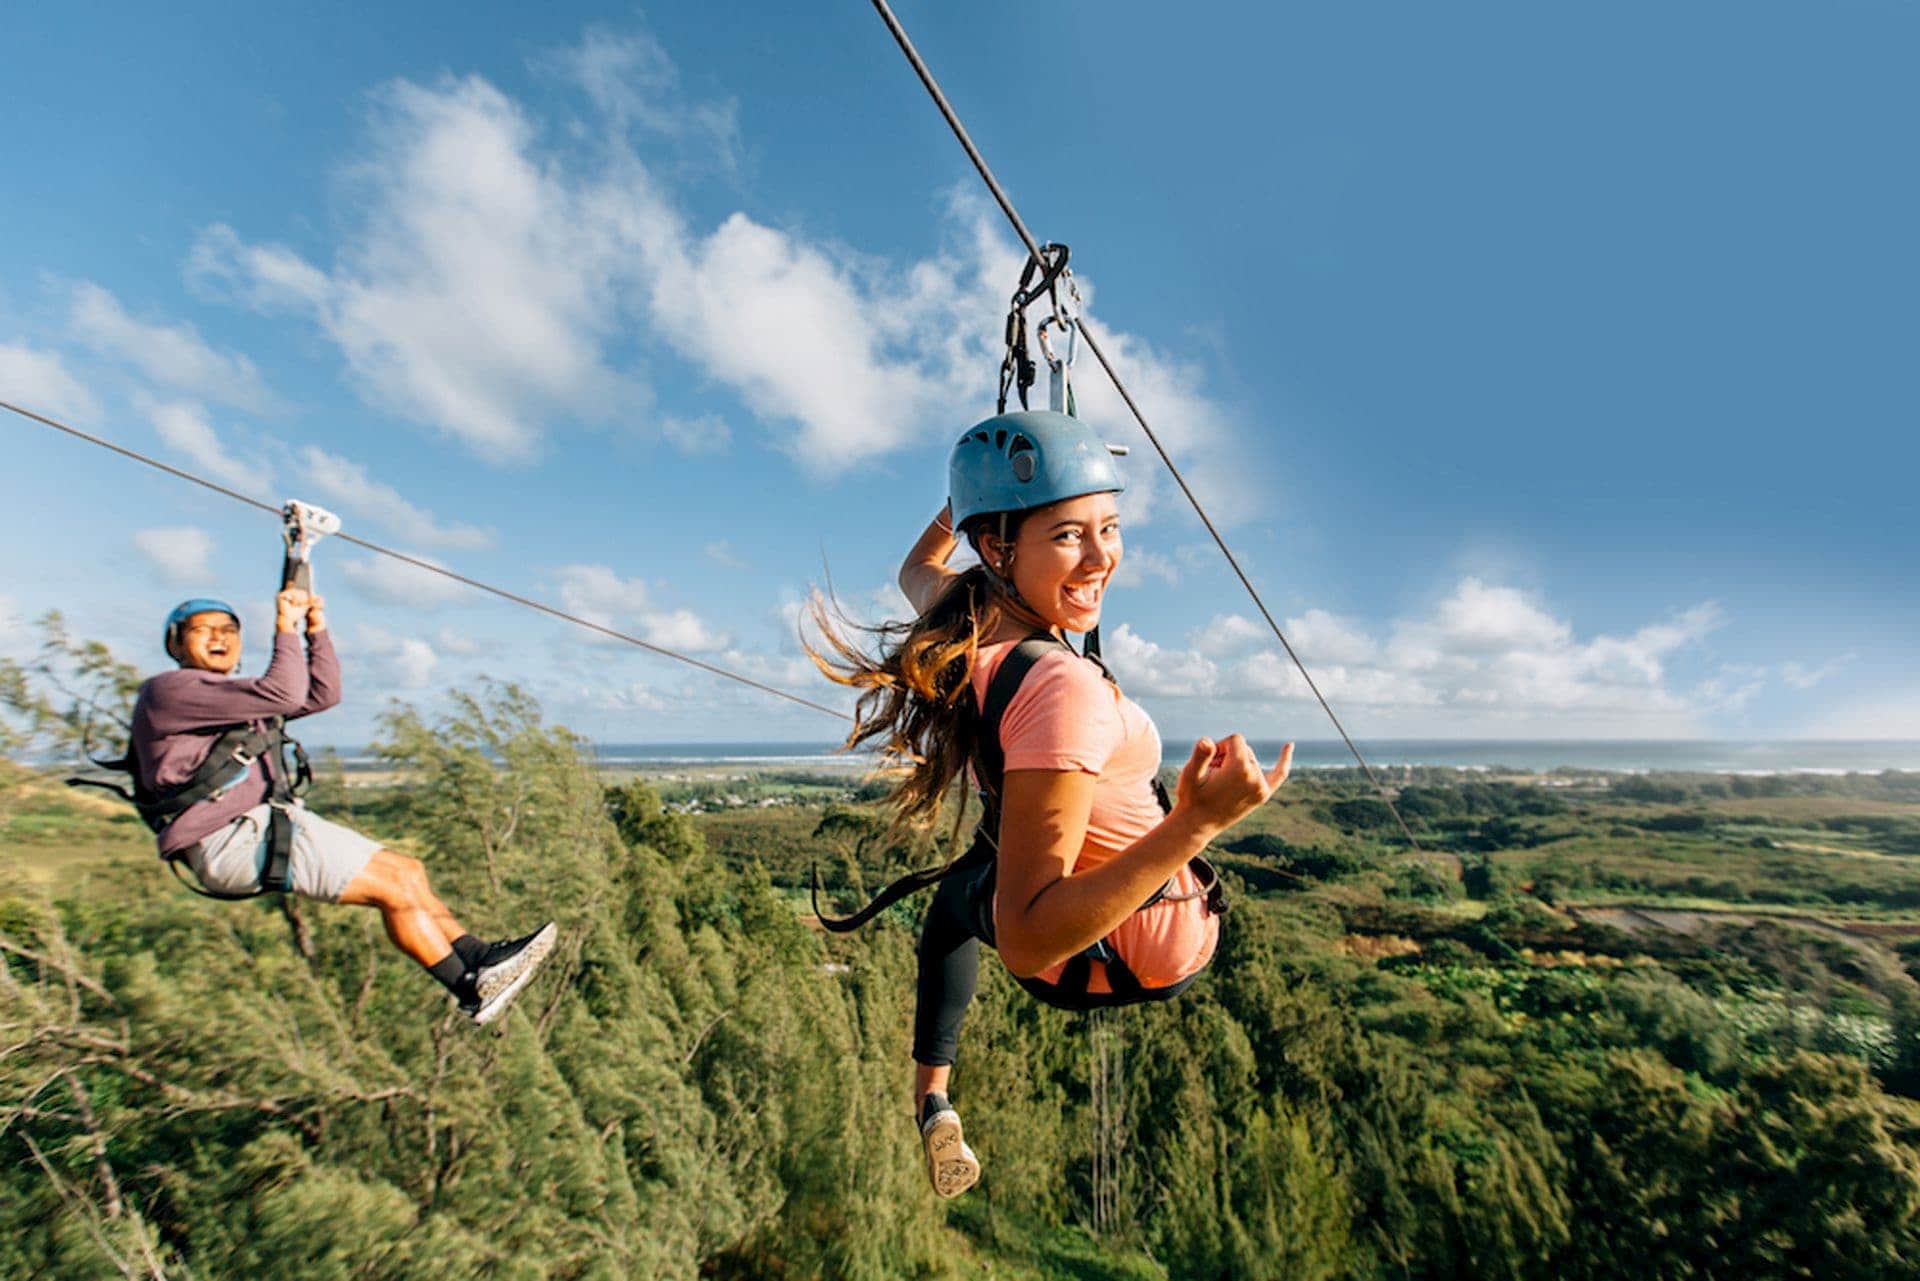 Is Ziplining Safe for People To Do?